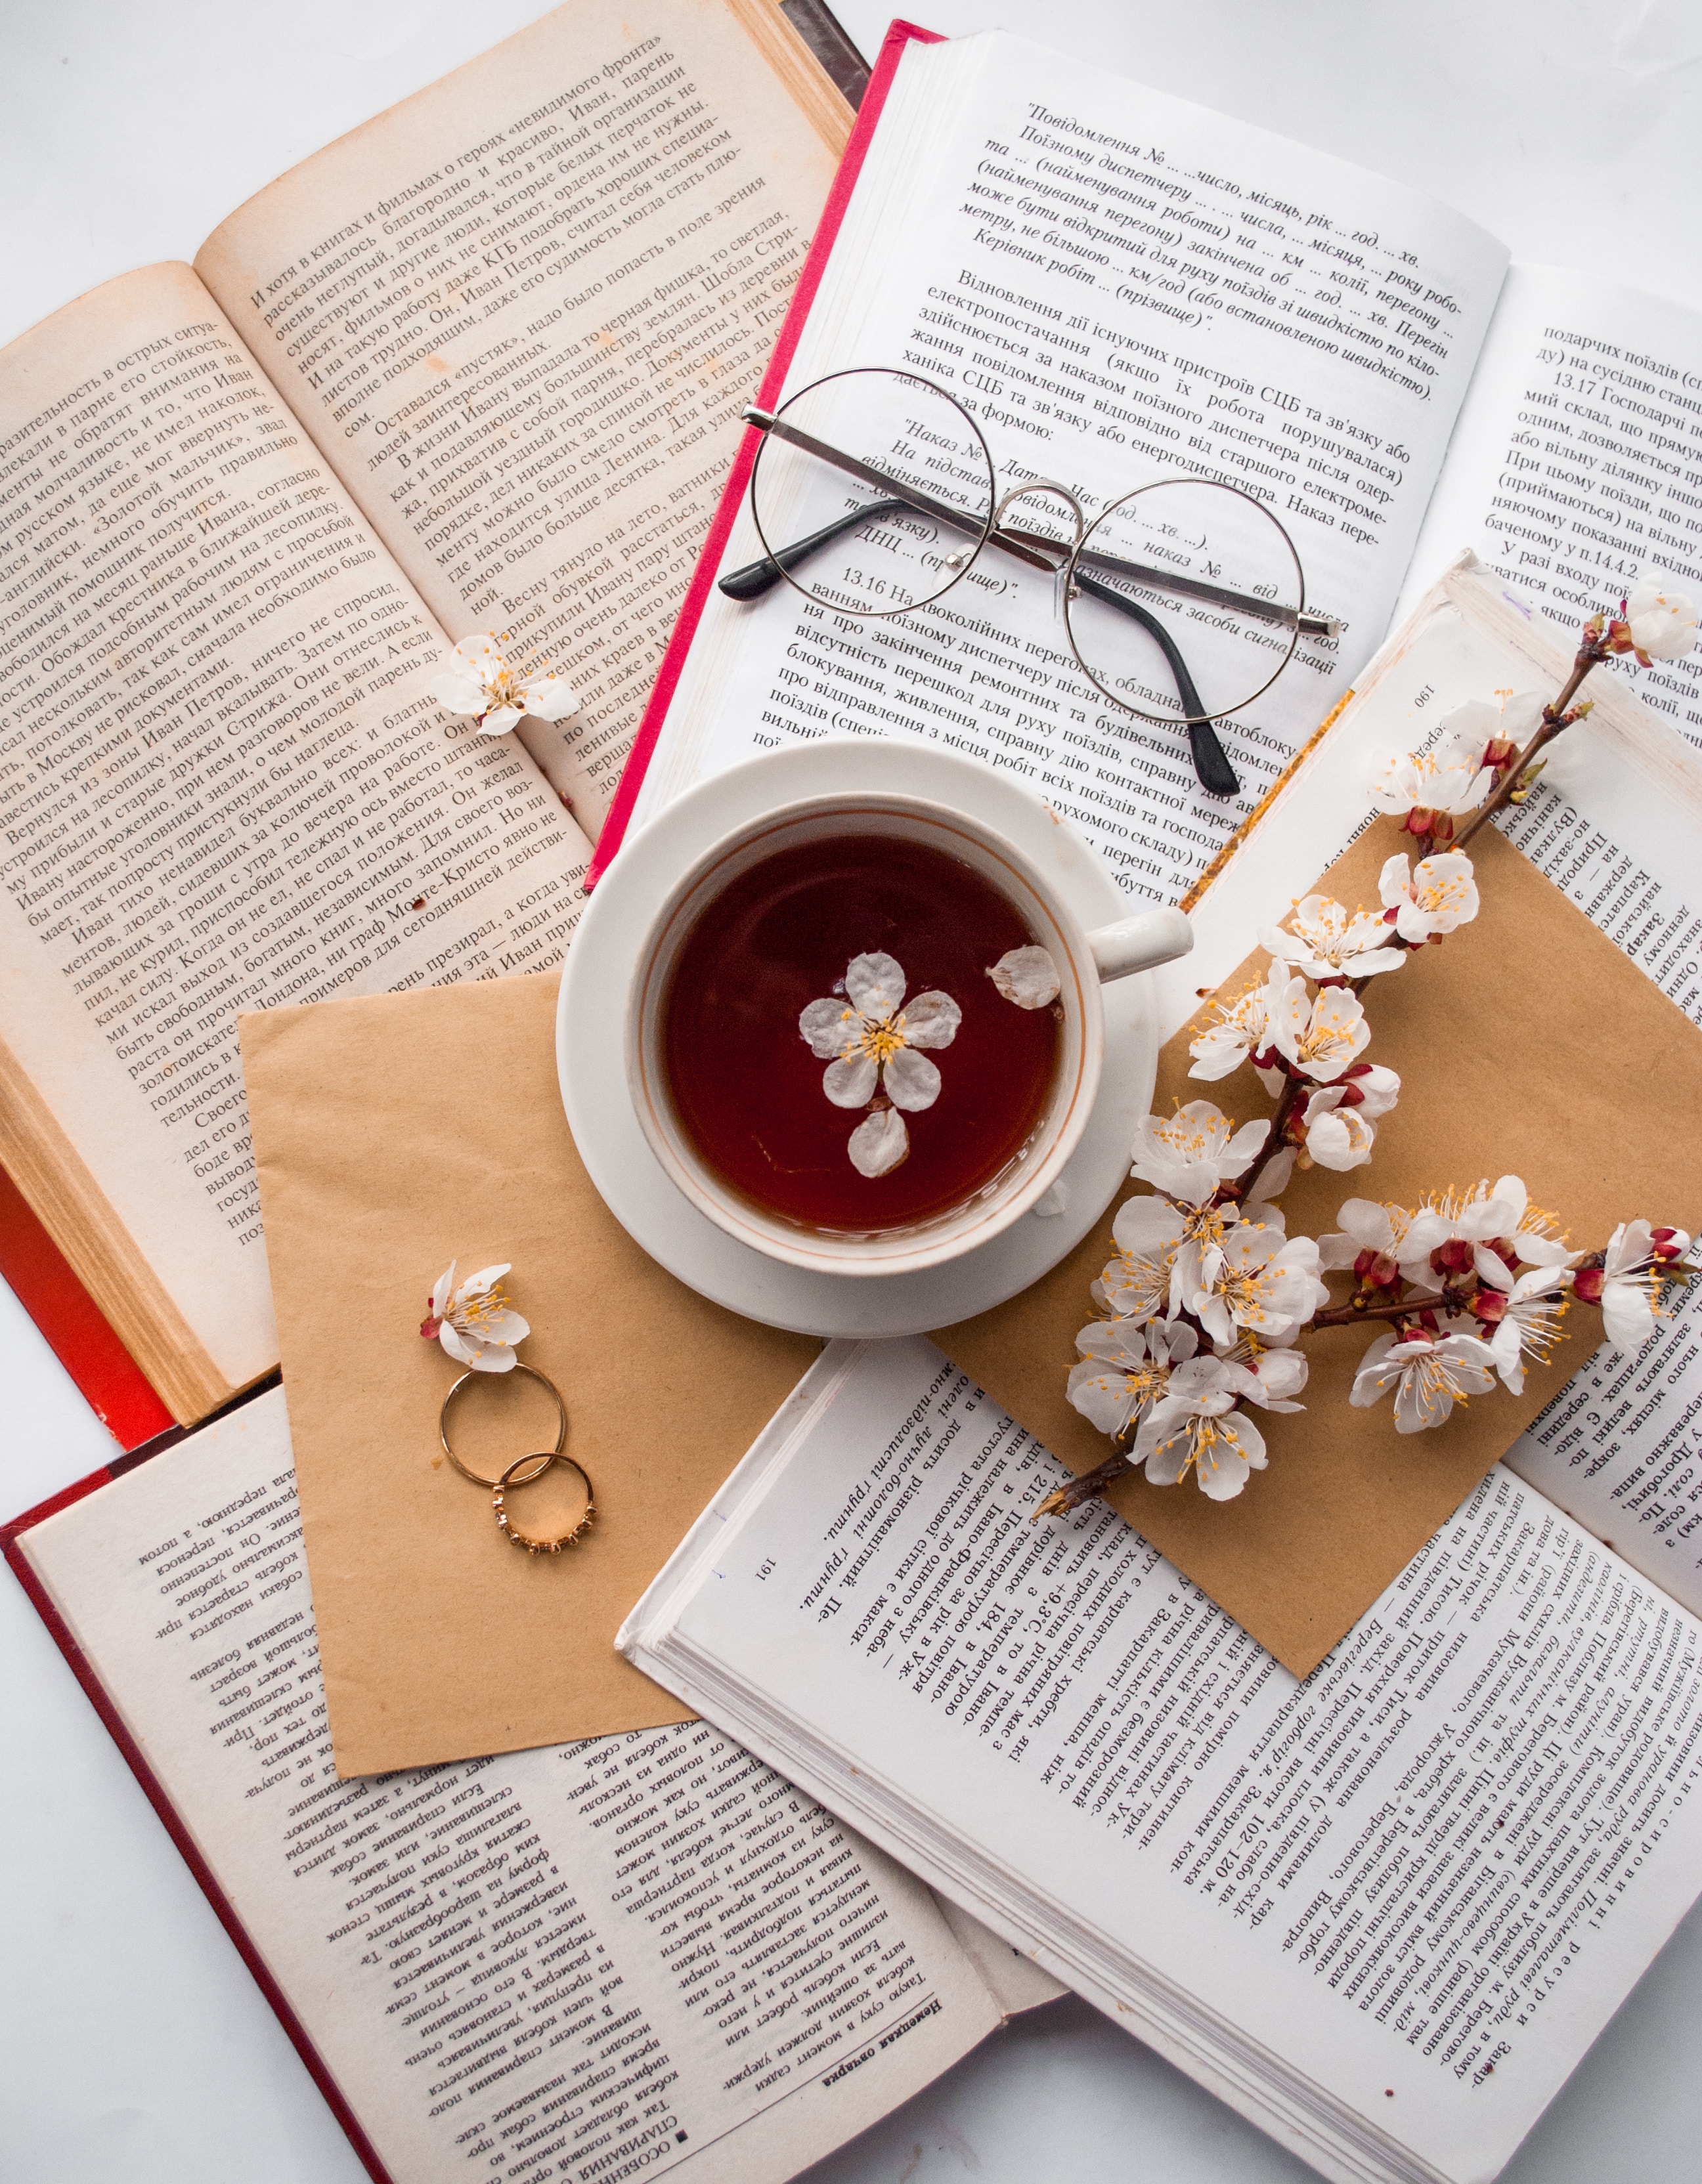 books, cup, flowers, rings, miscellanea, miscellaneous, glasses, spectacles